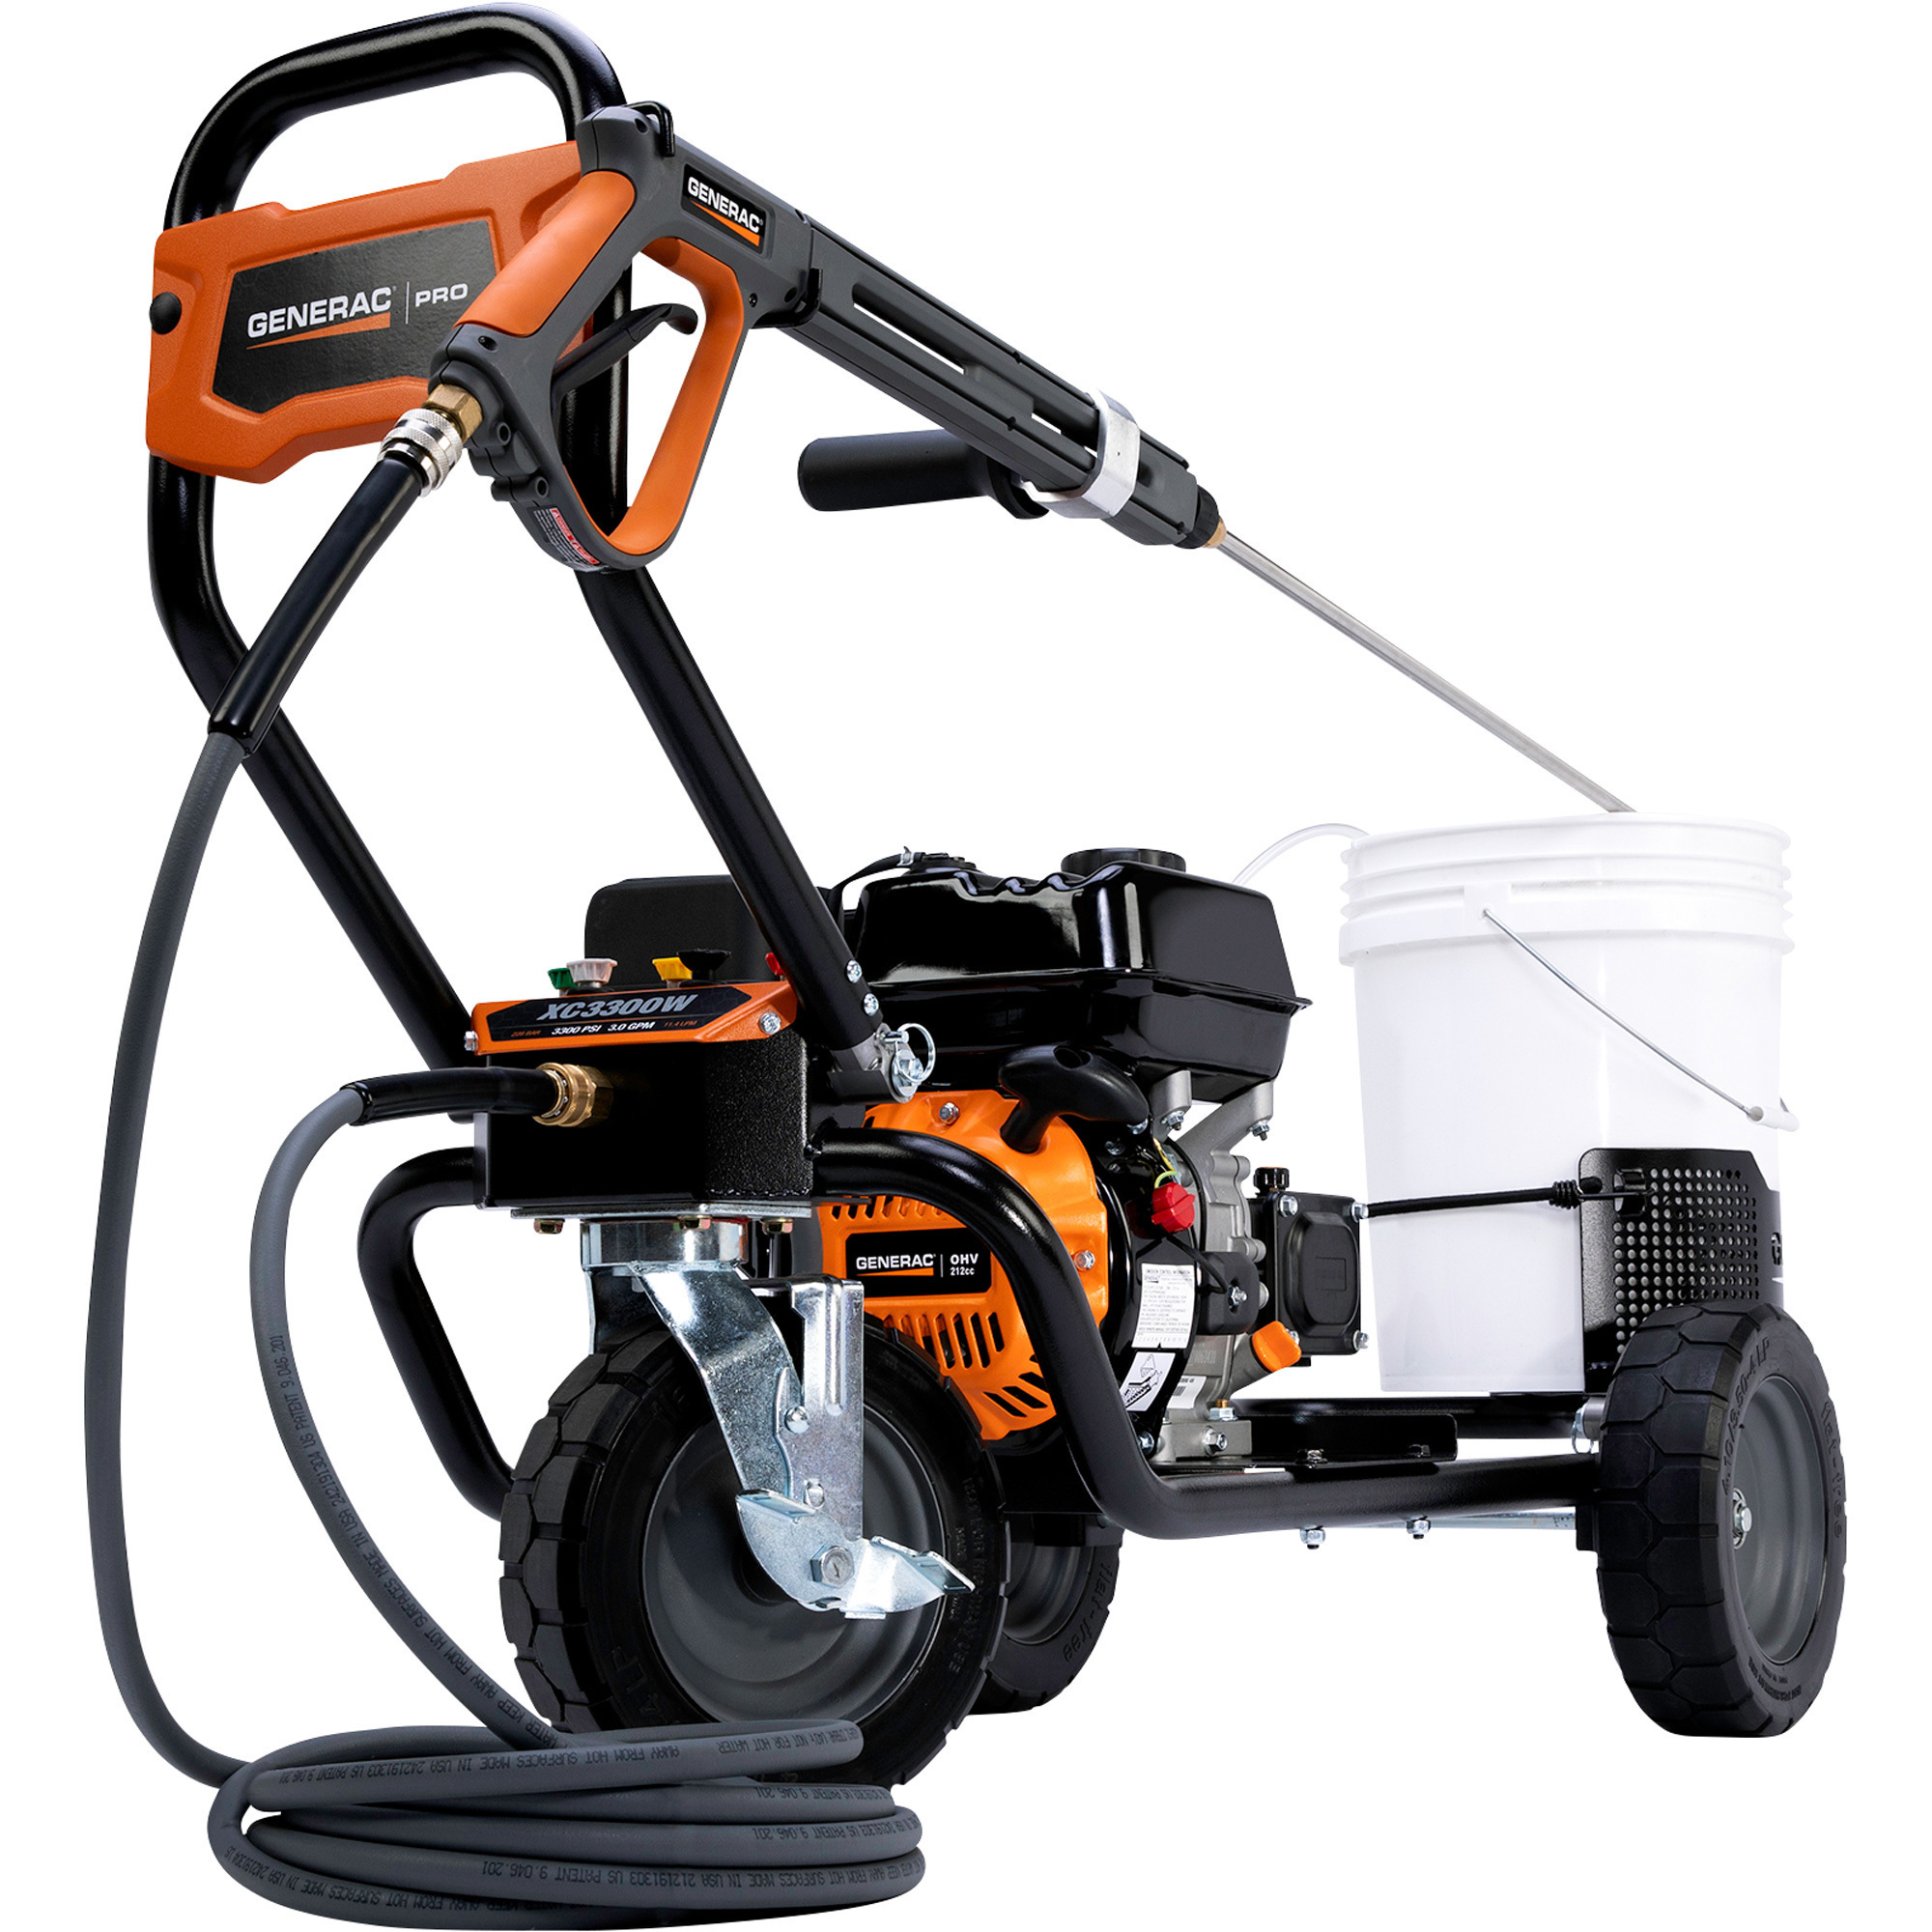 Generac 8870 3300 PSI 3.0 GPM Gas Powered Commercial Grade Pressure Washer